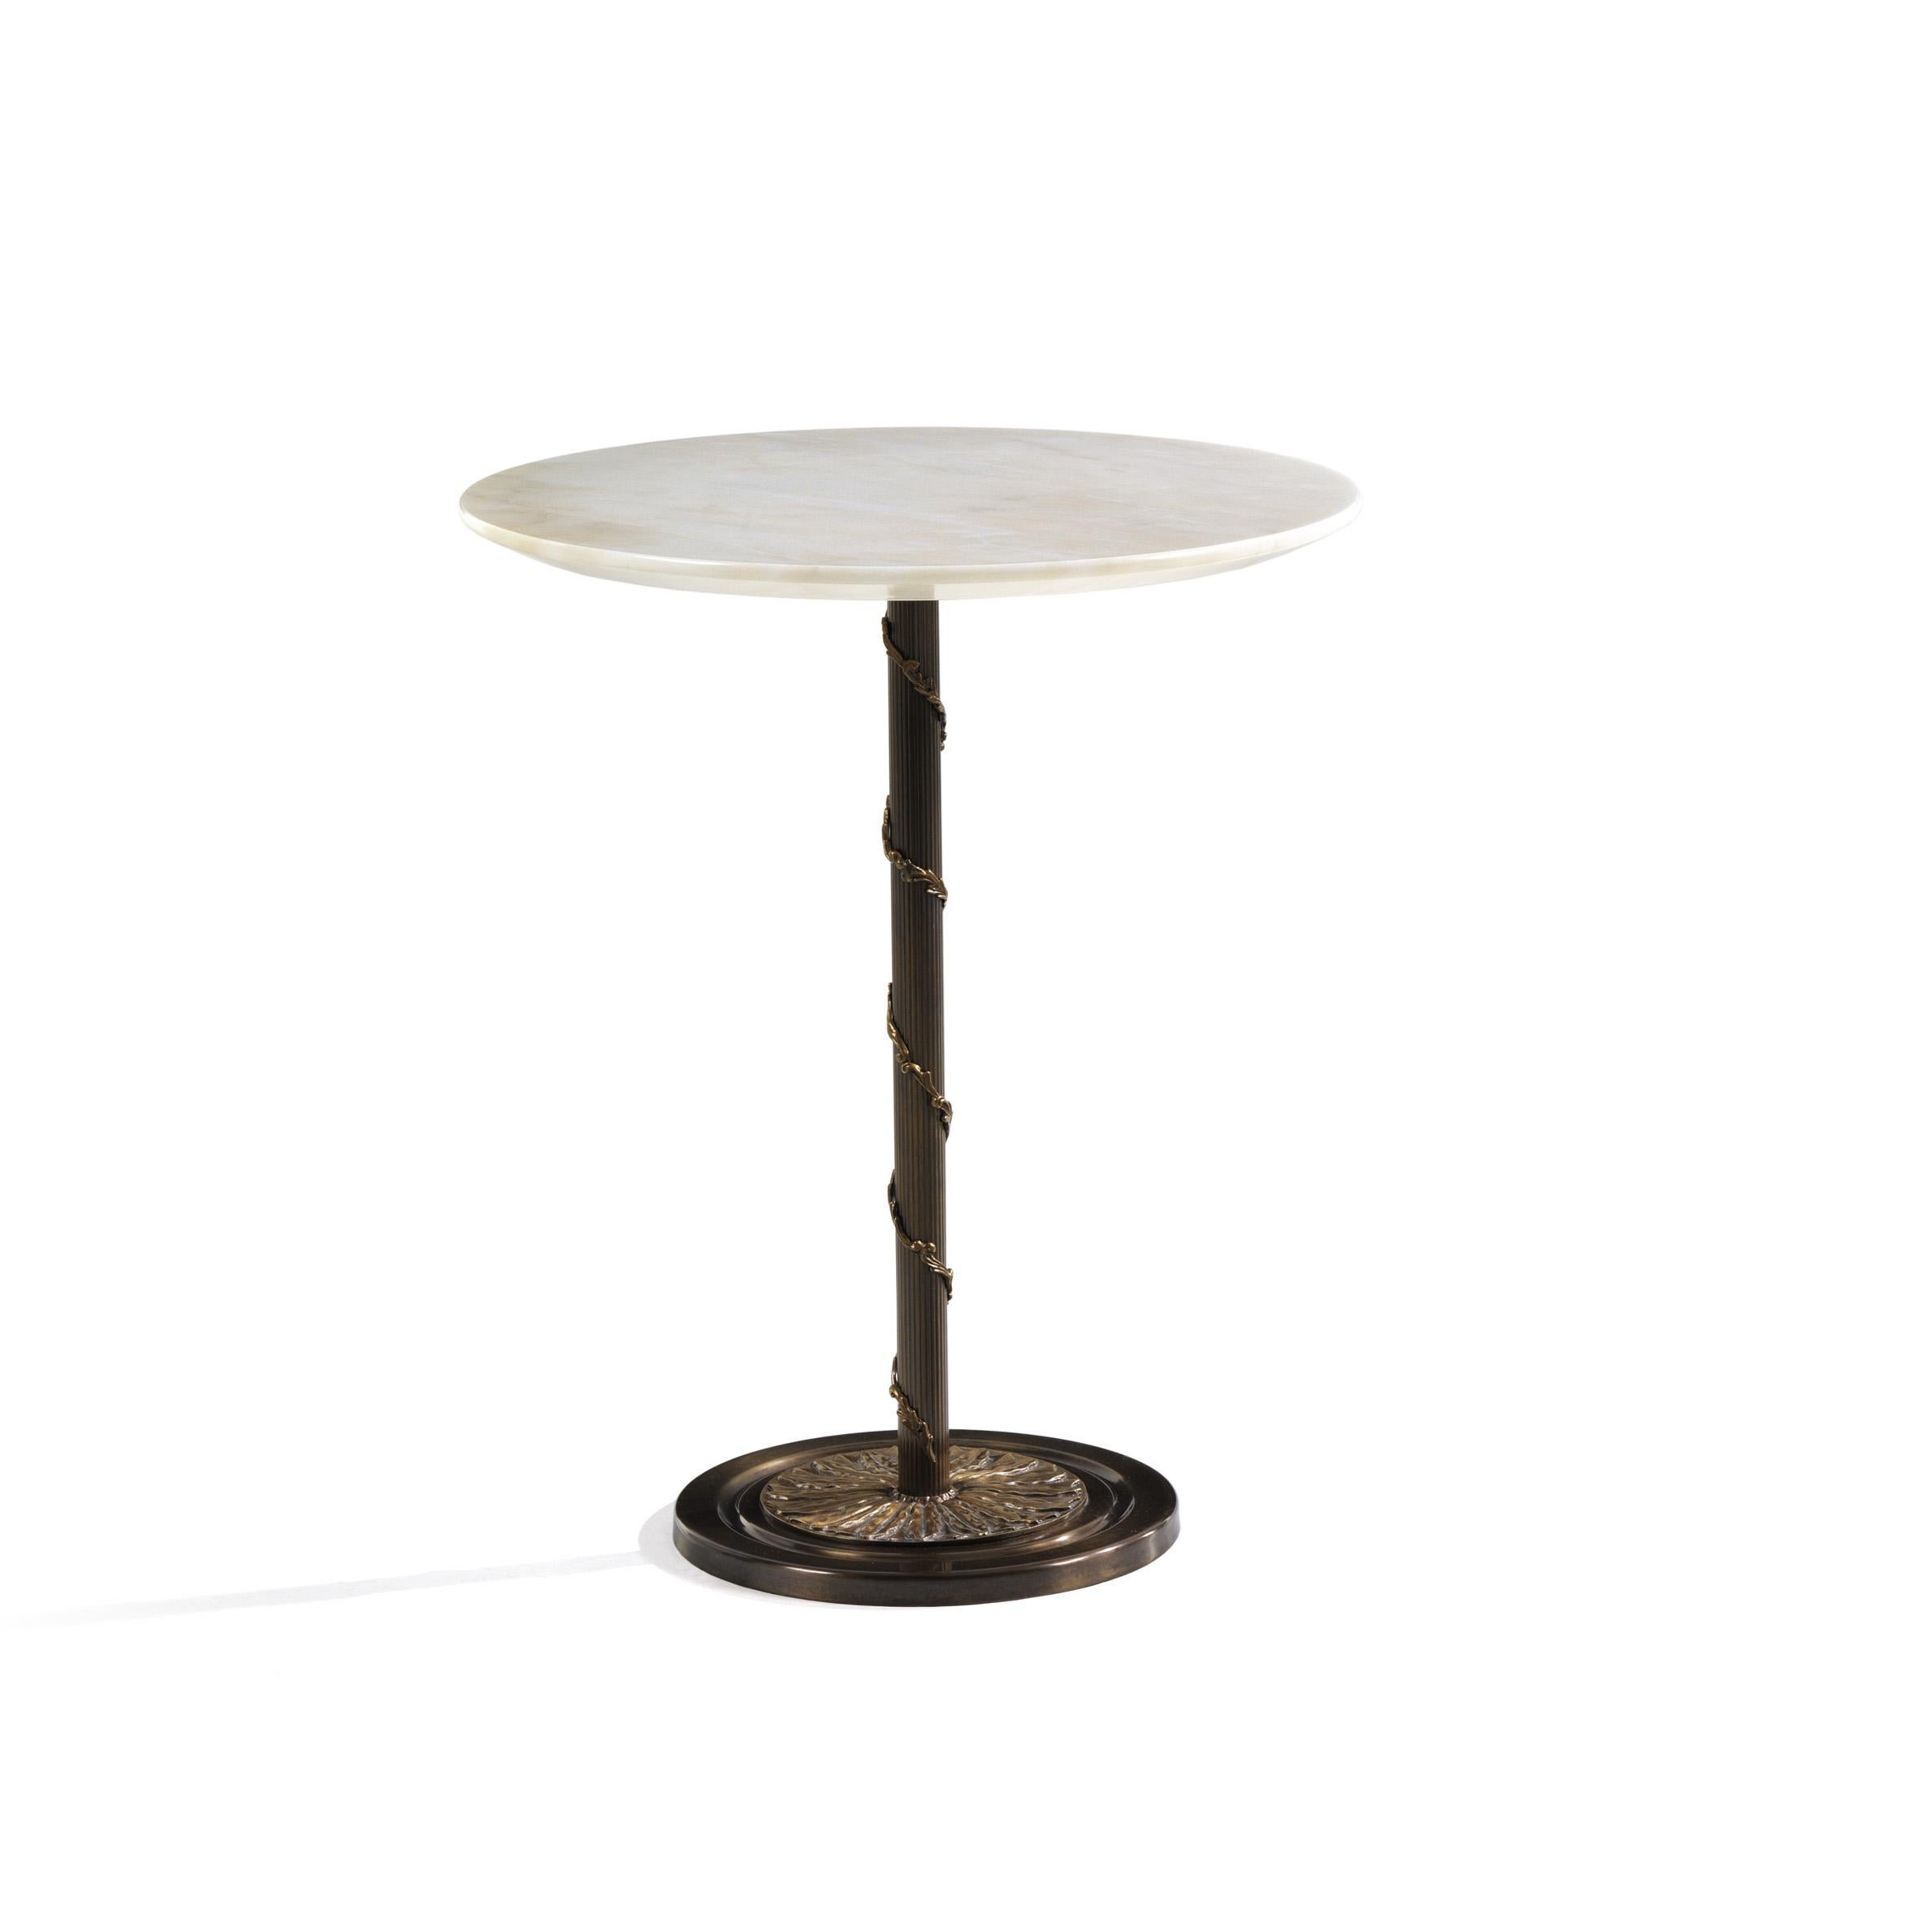 The refined and elegant T107/H small side table, with brass burnished finish base and Estremoz marble top (MR08), is an evergreen of Zanaboni’s collection and it can be matched to any classic or contemporary designs, for a unique and luxury sitting.